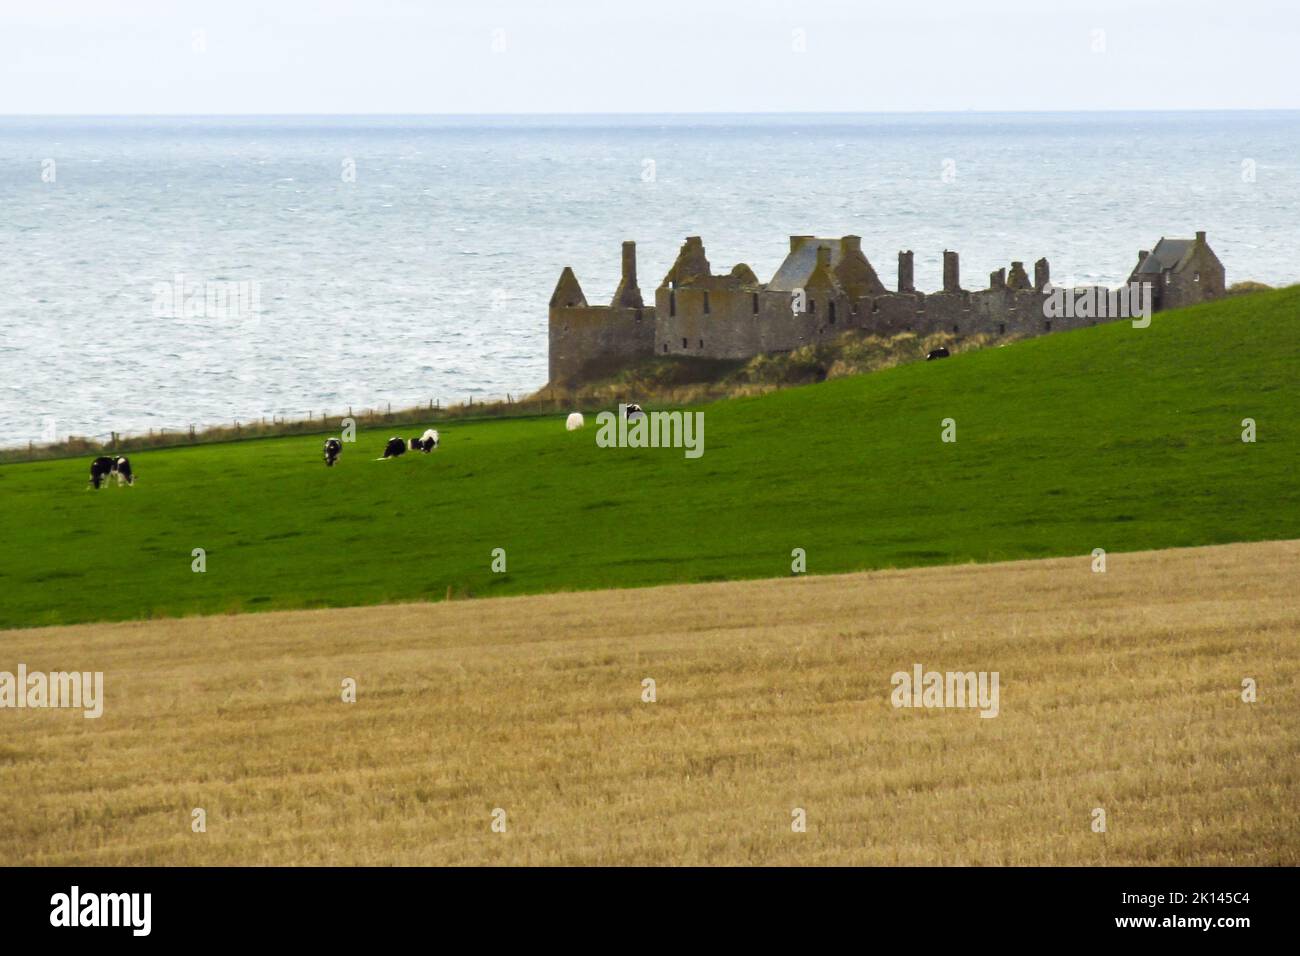 Cows in a field, with the Ruins of a medieval Scottish castle in the background, along the Aberdeenshire coast. Stock Photo